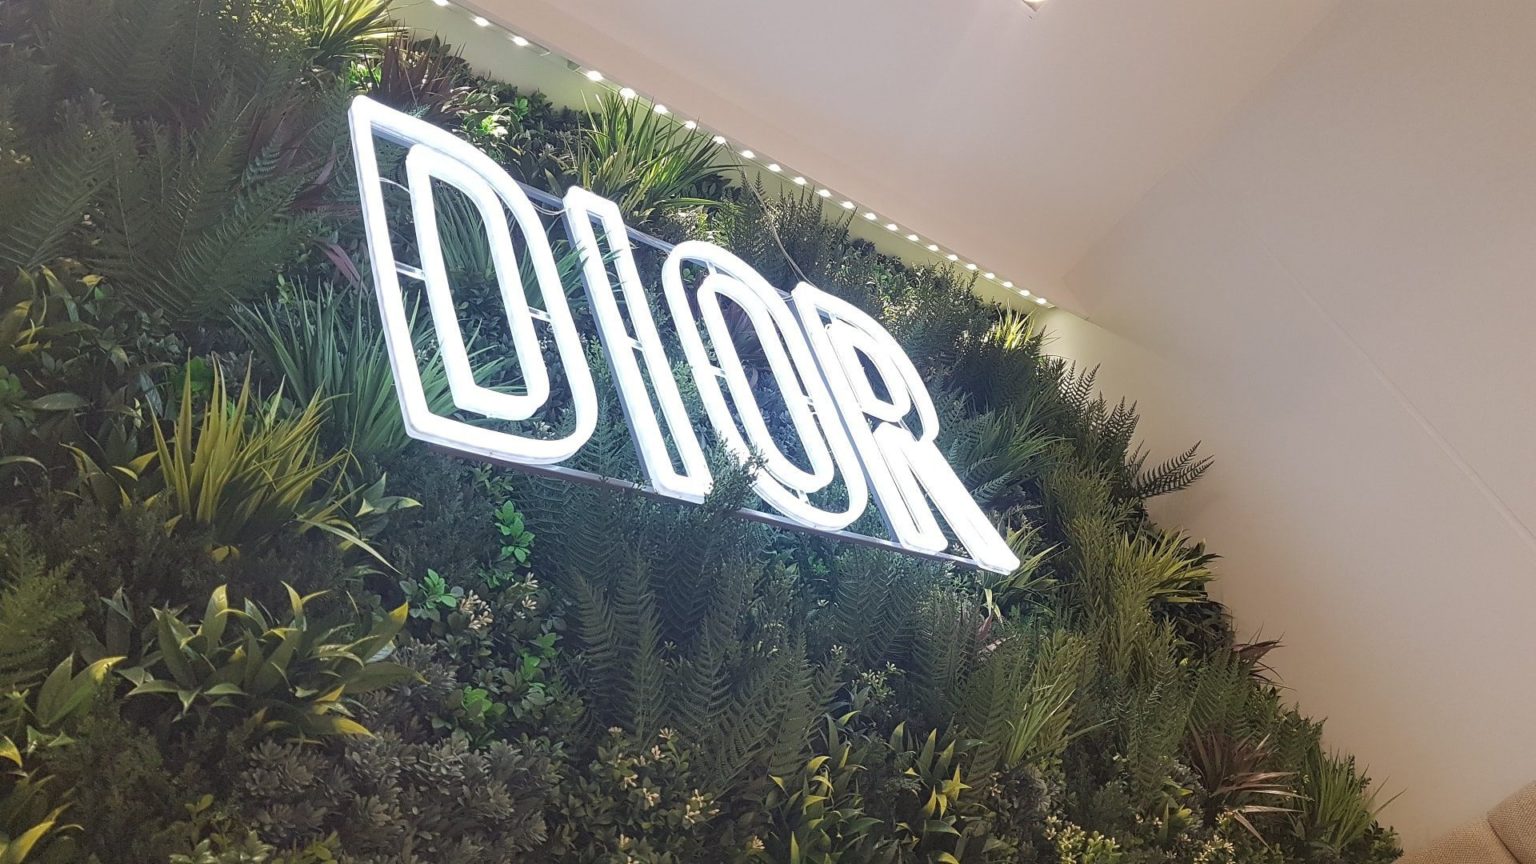 Christian Dior sign on realistic plant wall